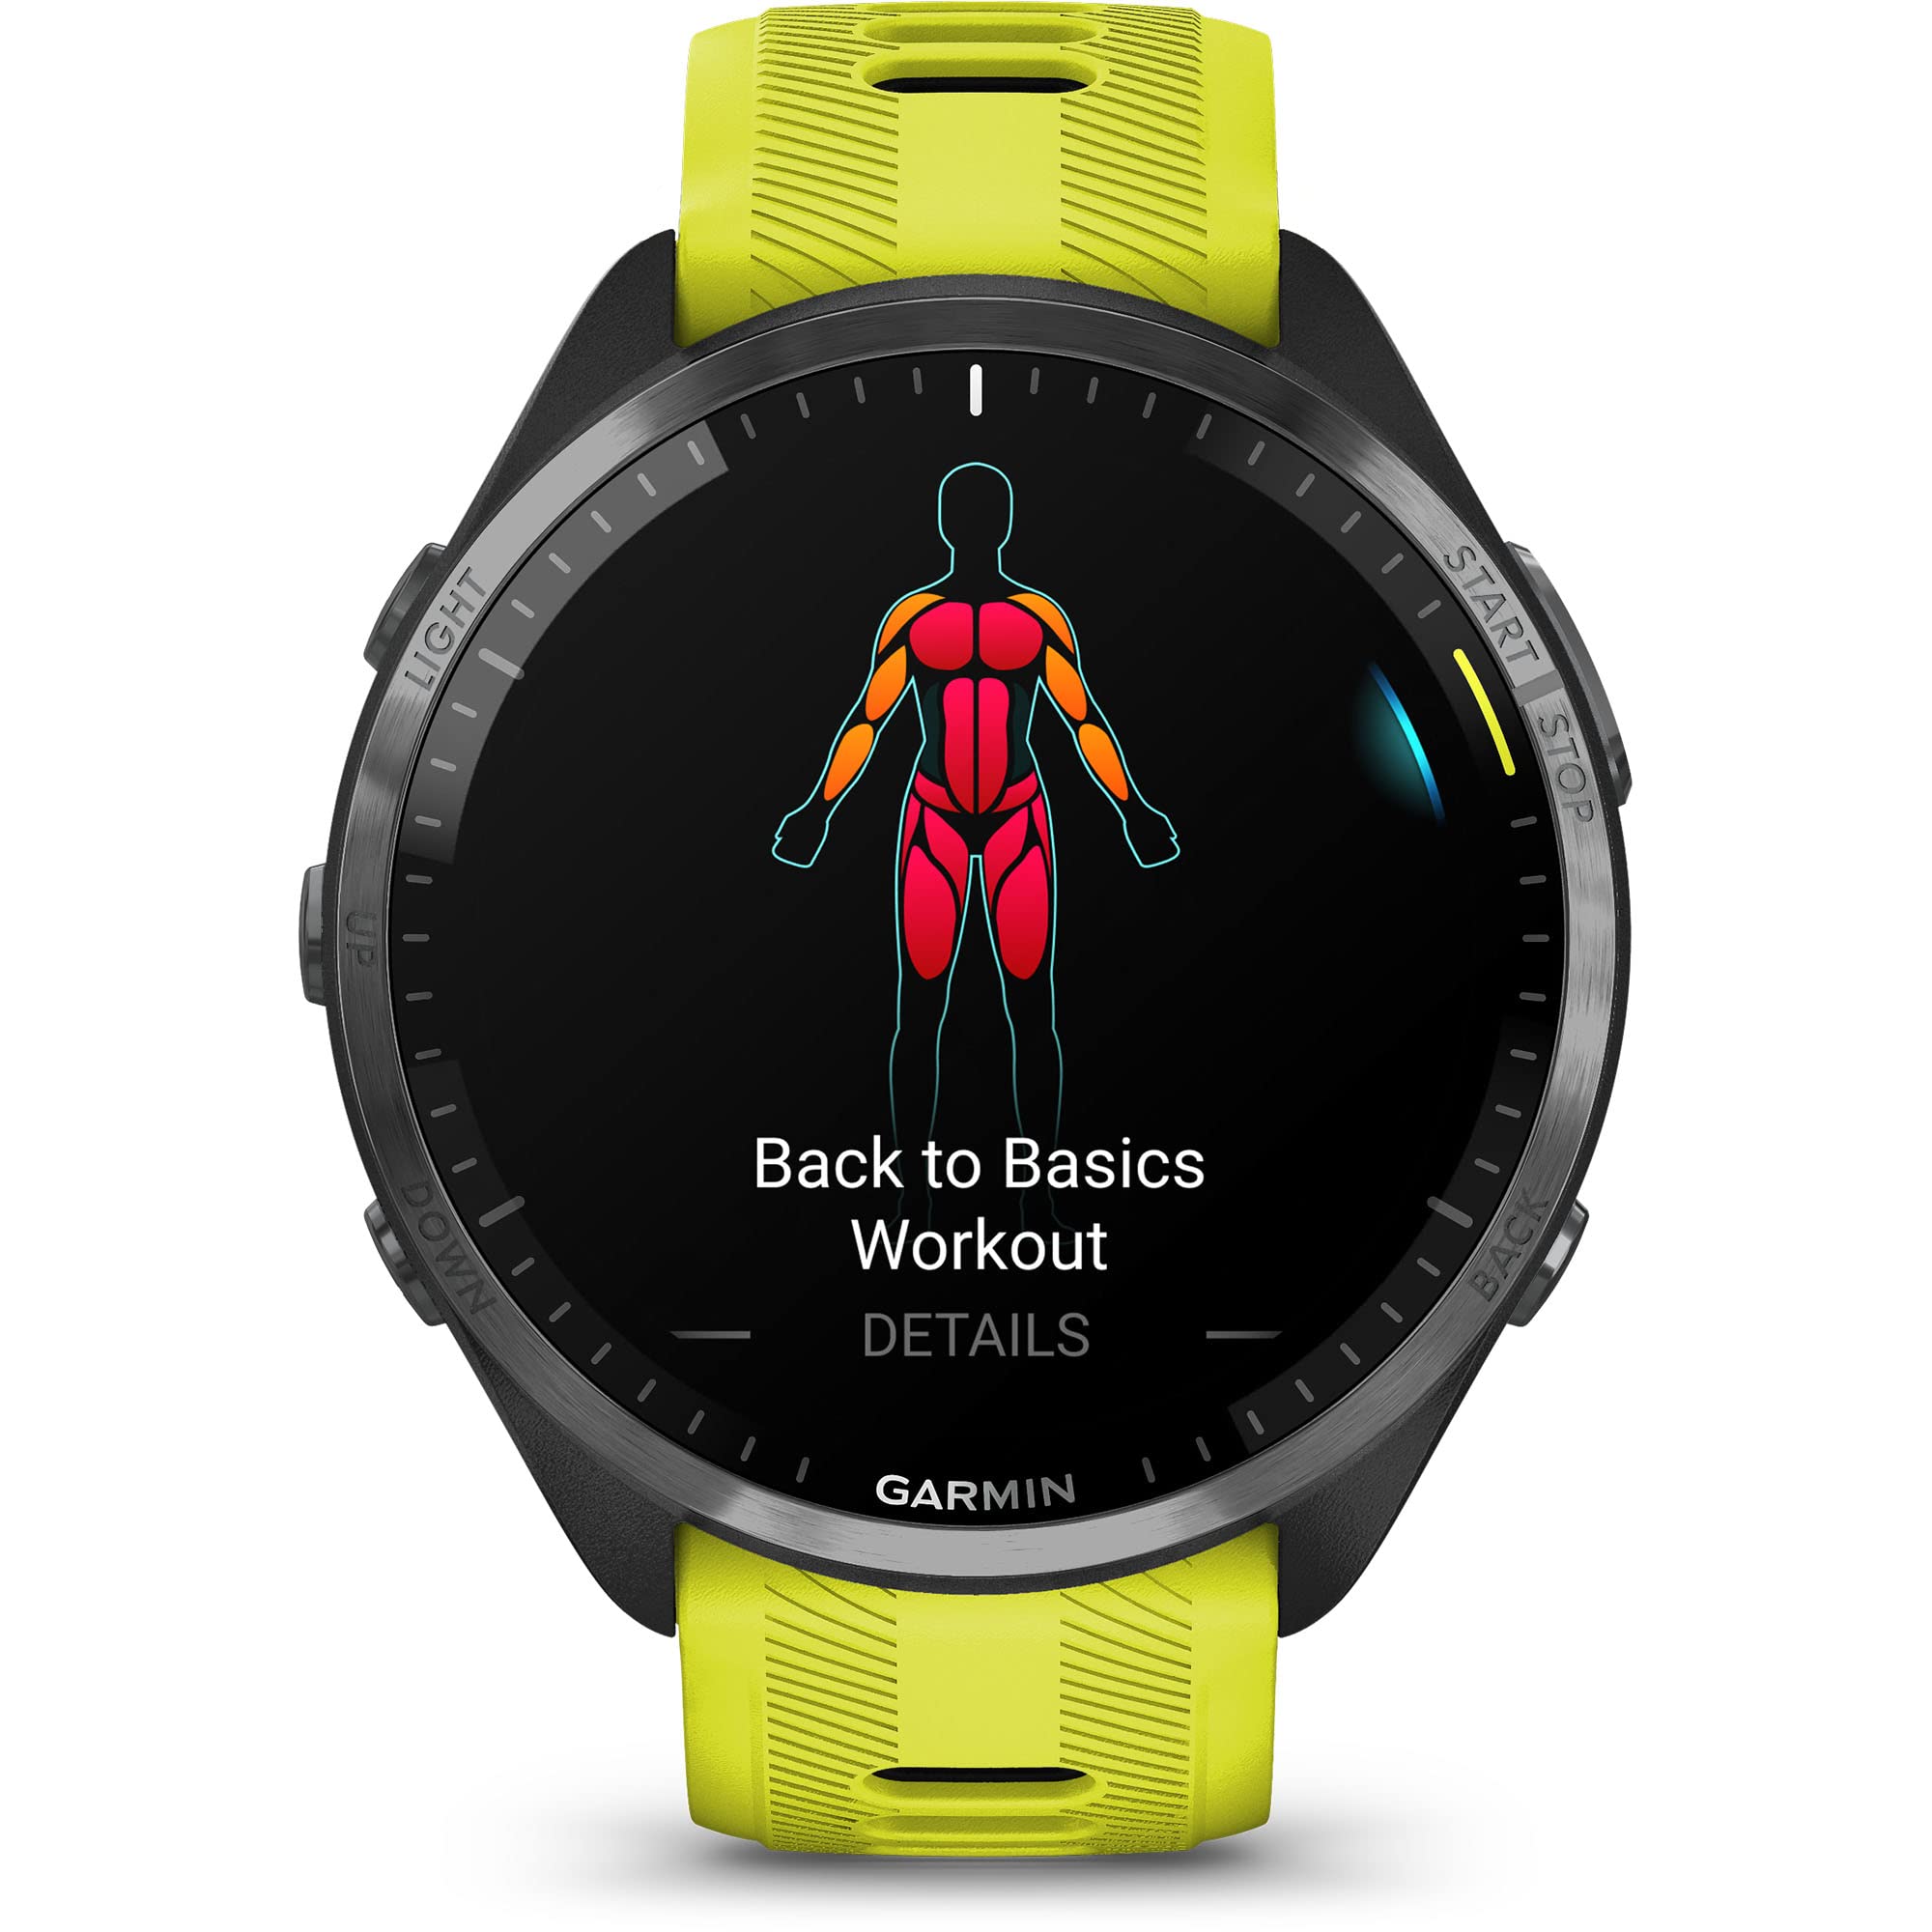 Garmin Forerunner® 965 Running Smartwatch, Colorful AMOLED Display, Training Metrics and Recovery Insights, Amp Yellow and Black - image 4 of 5